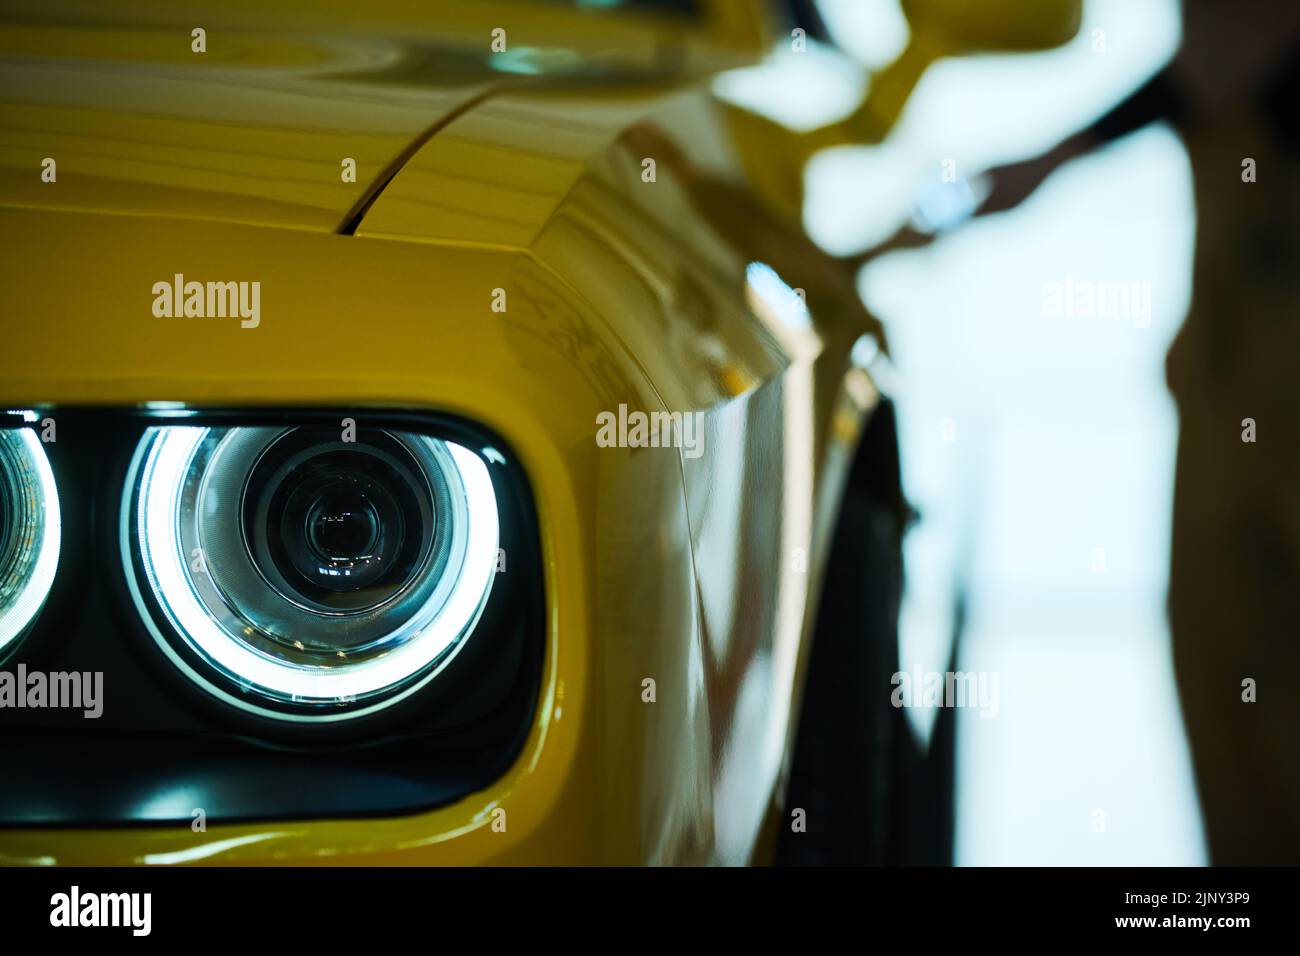 Headlight on the front part of luxurious electric car of yellow color standing on parking site, garage or workshop after repair Stock Photo